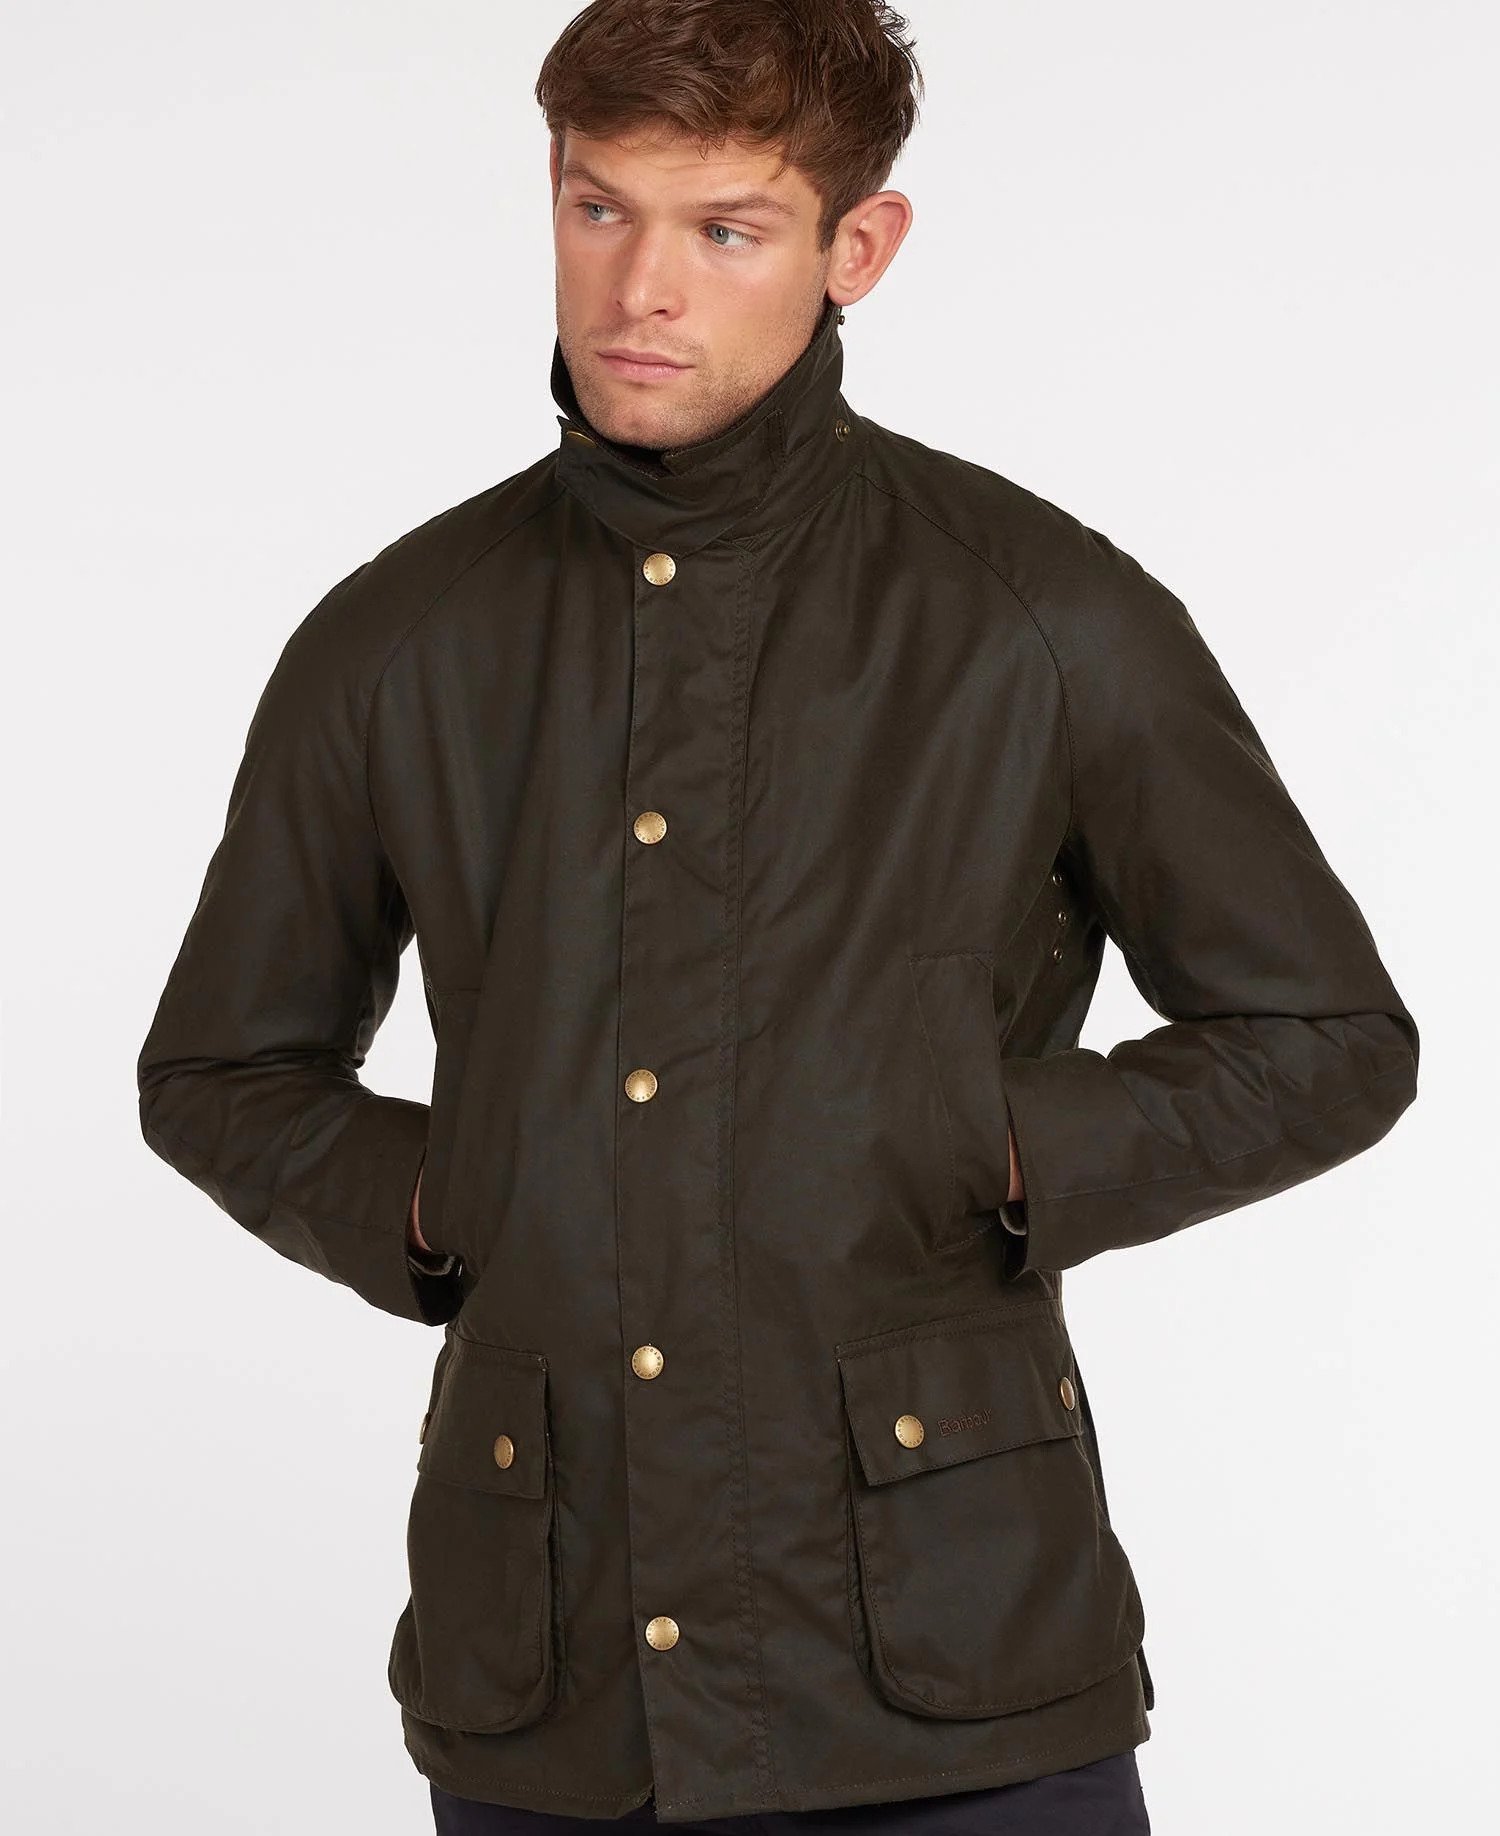 A Look at the Iconic Ashby Barbour Jacket | Barbour | Barbour